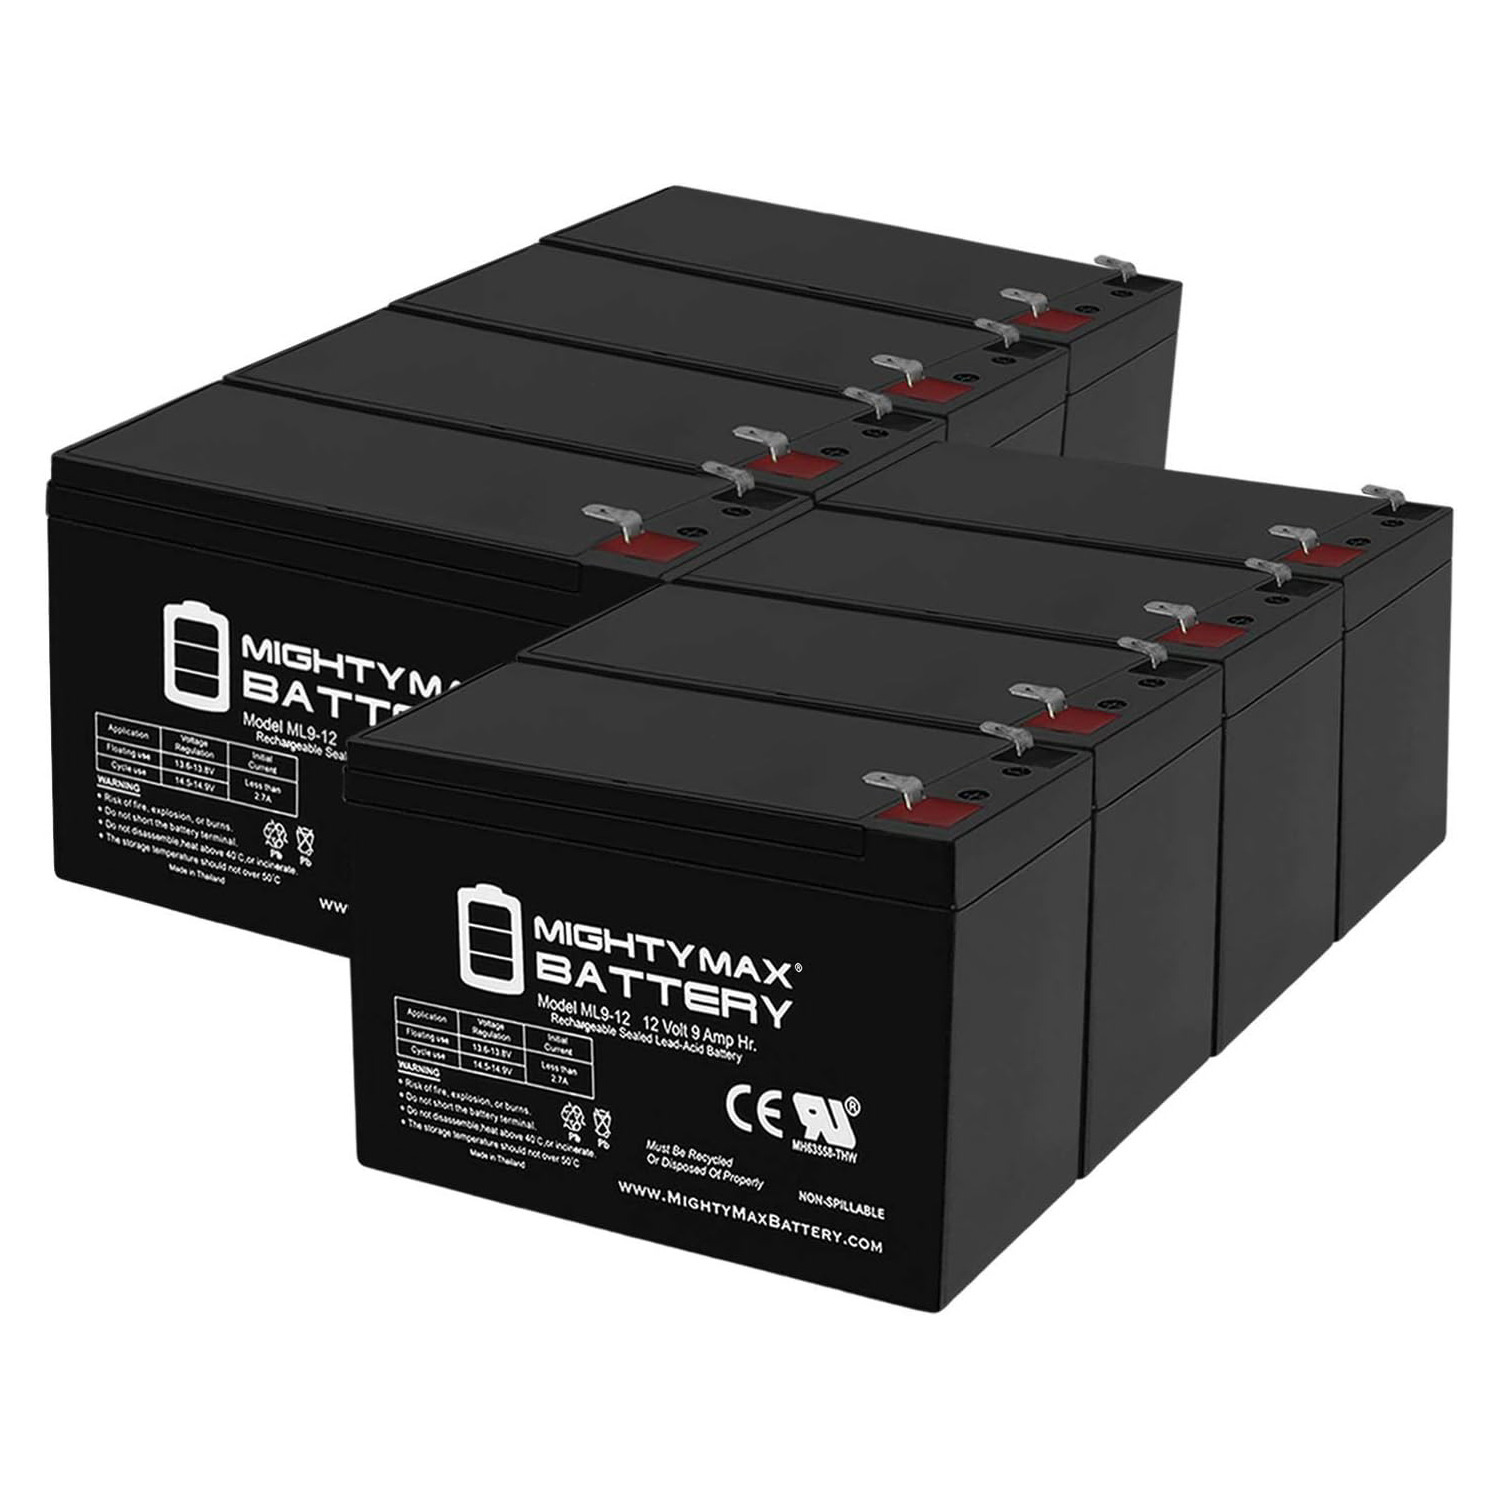 Altronix SMP7PMCTXPD8 12V, 9Ah Lead Acid Battery - 8 Pack